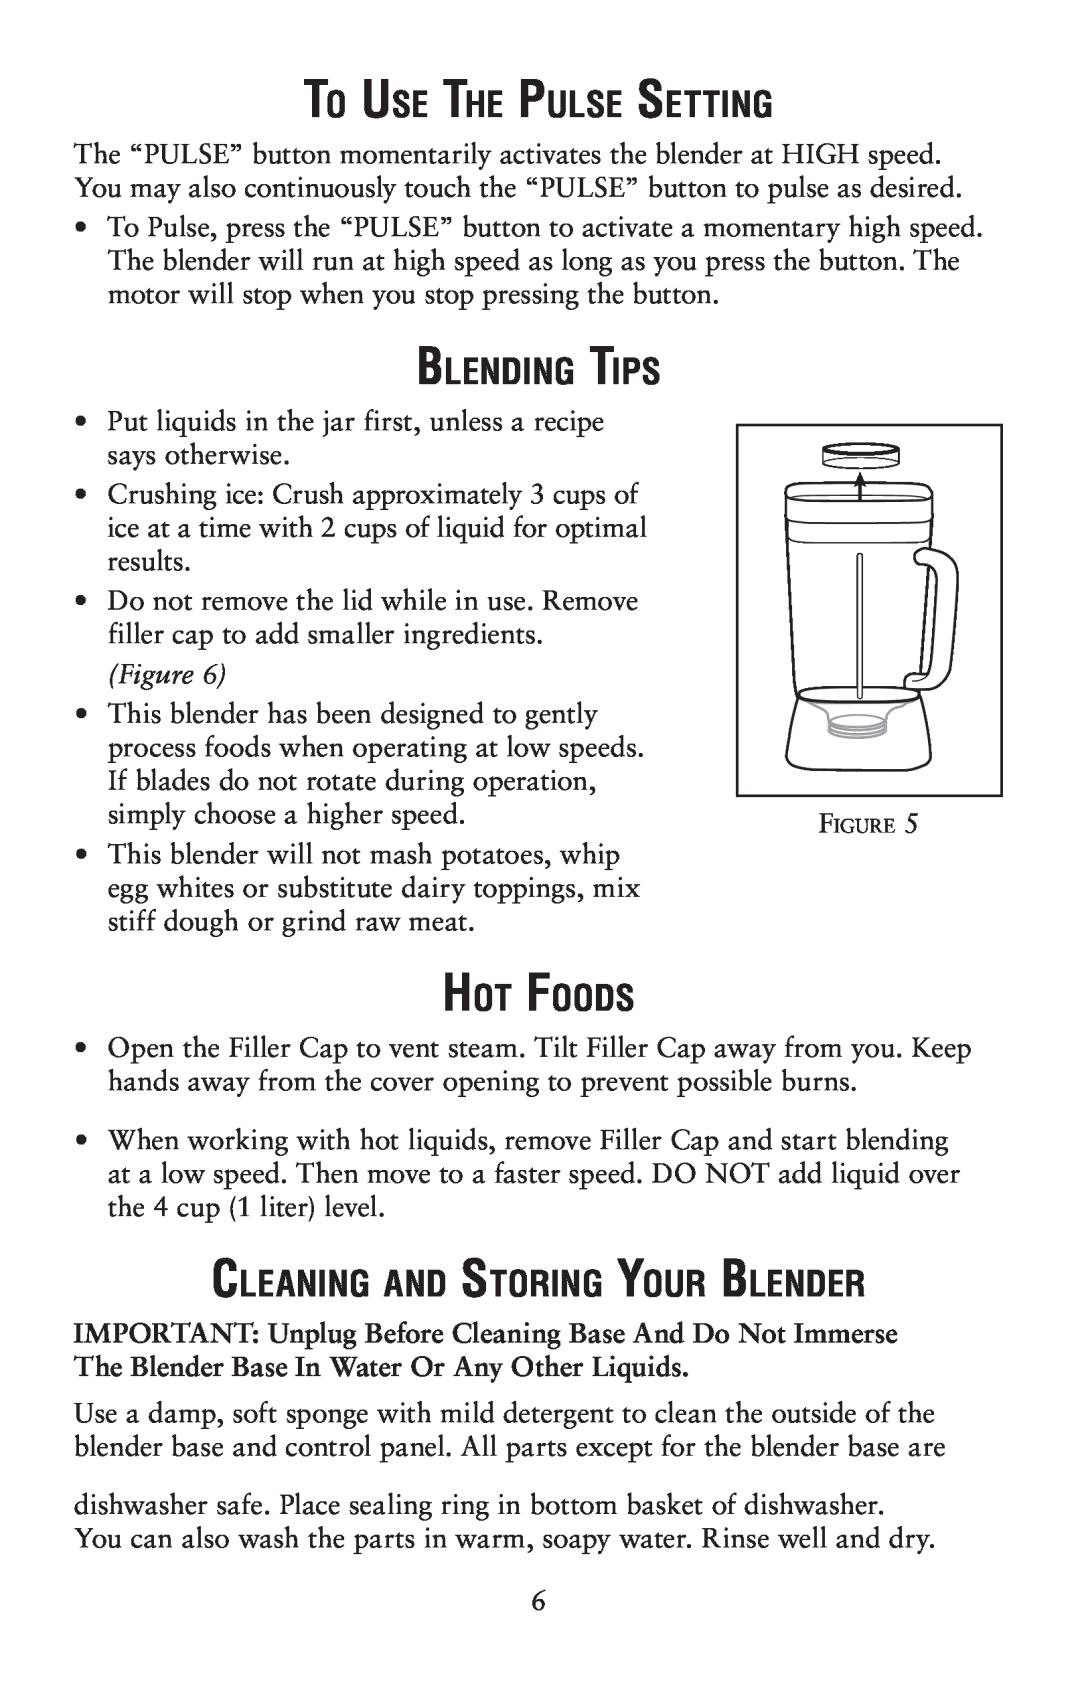 Oster 139846 user manual To Use The Pulse Setting, Blending Tips, Hot Foods, Cleaning and Storing Your Blender, Figure 